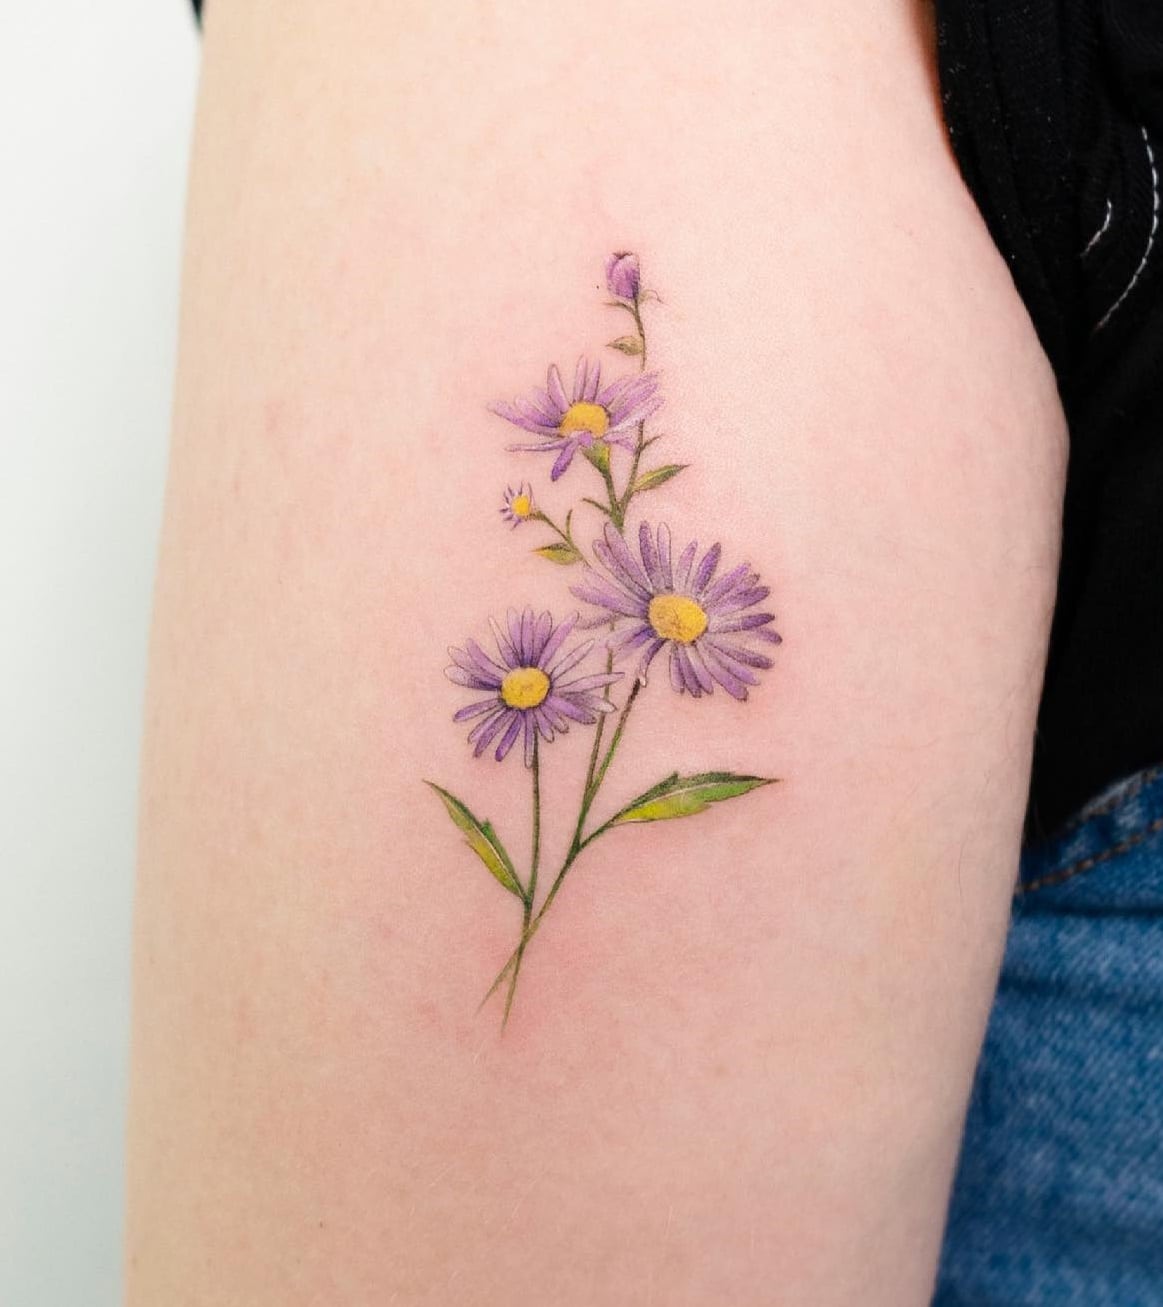 Fine line flower bouquet tattoo located on the inner